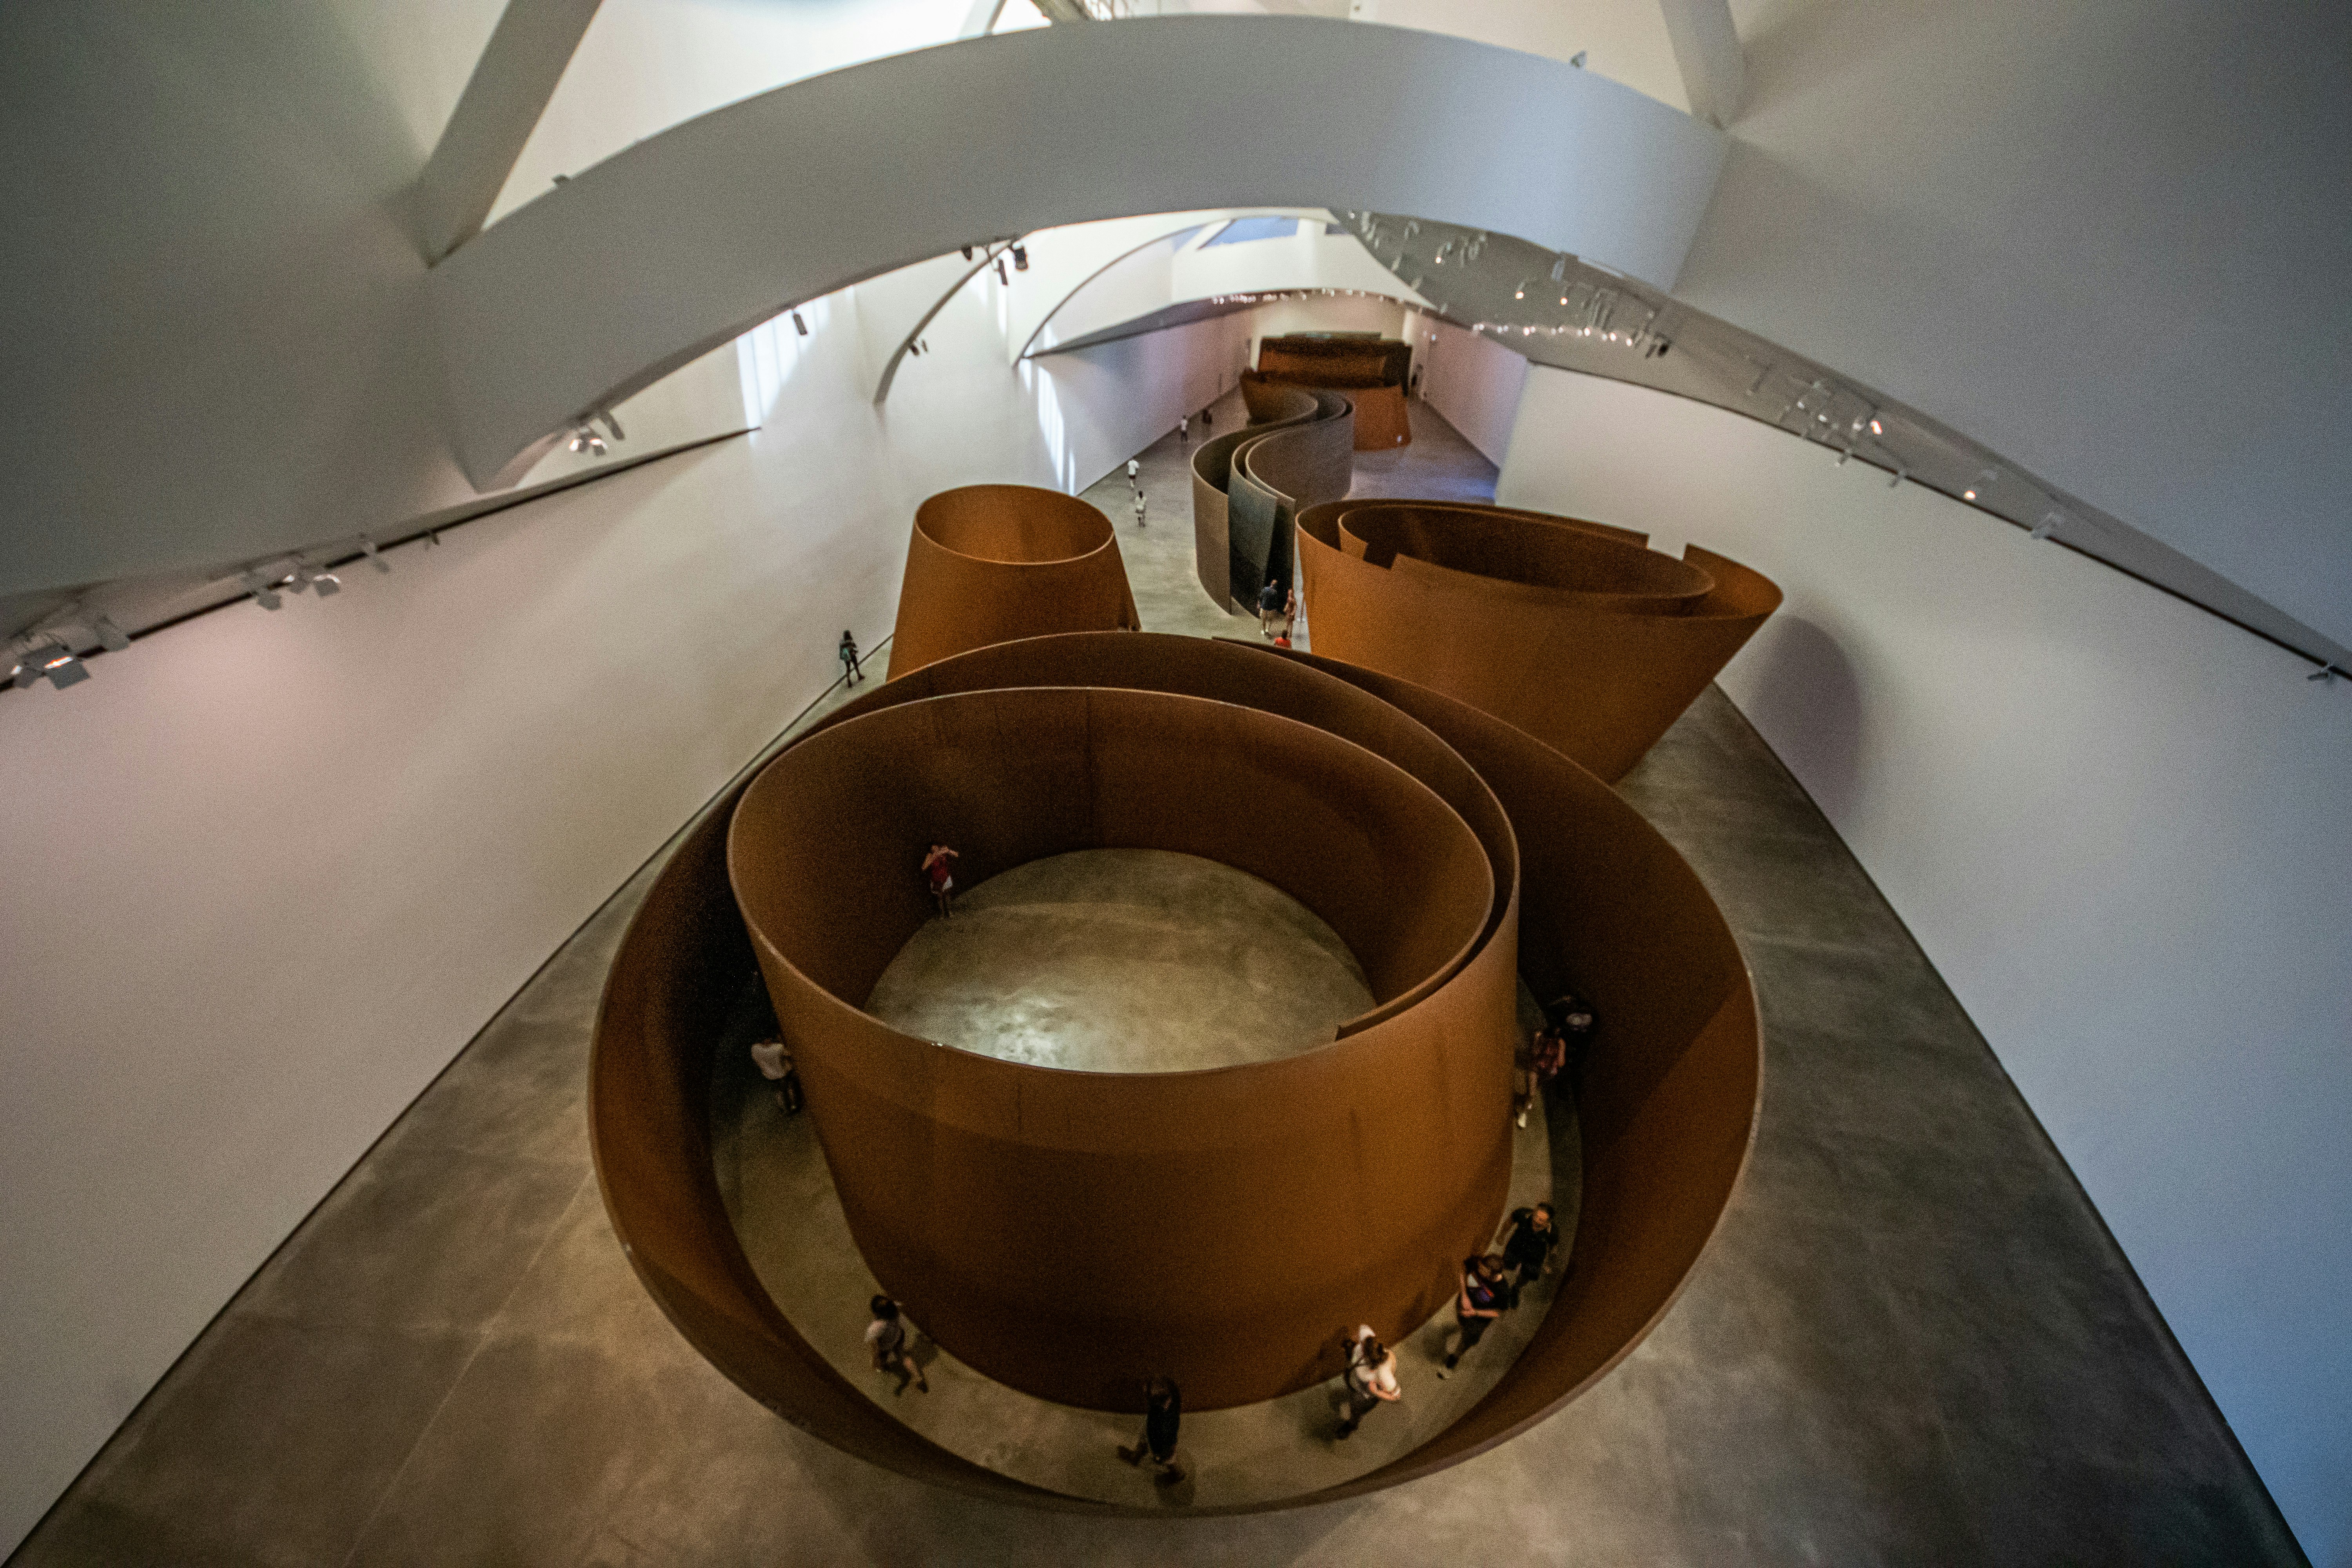 Richard Serra's The Matter of Time installation at the Guggenheim museum, resembling eight pieces of gigantic torqued ellipses.